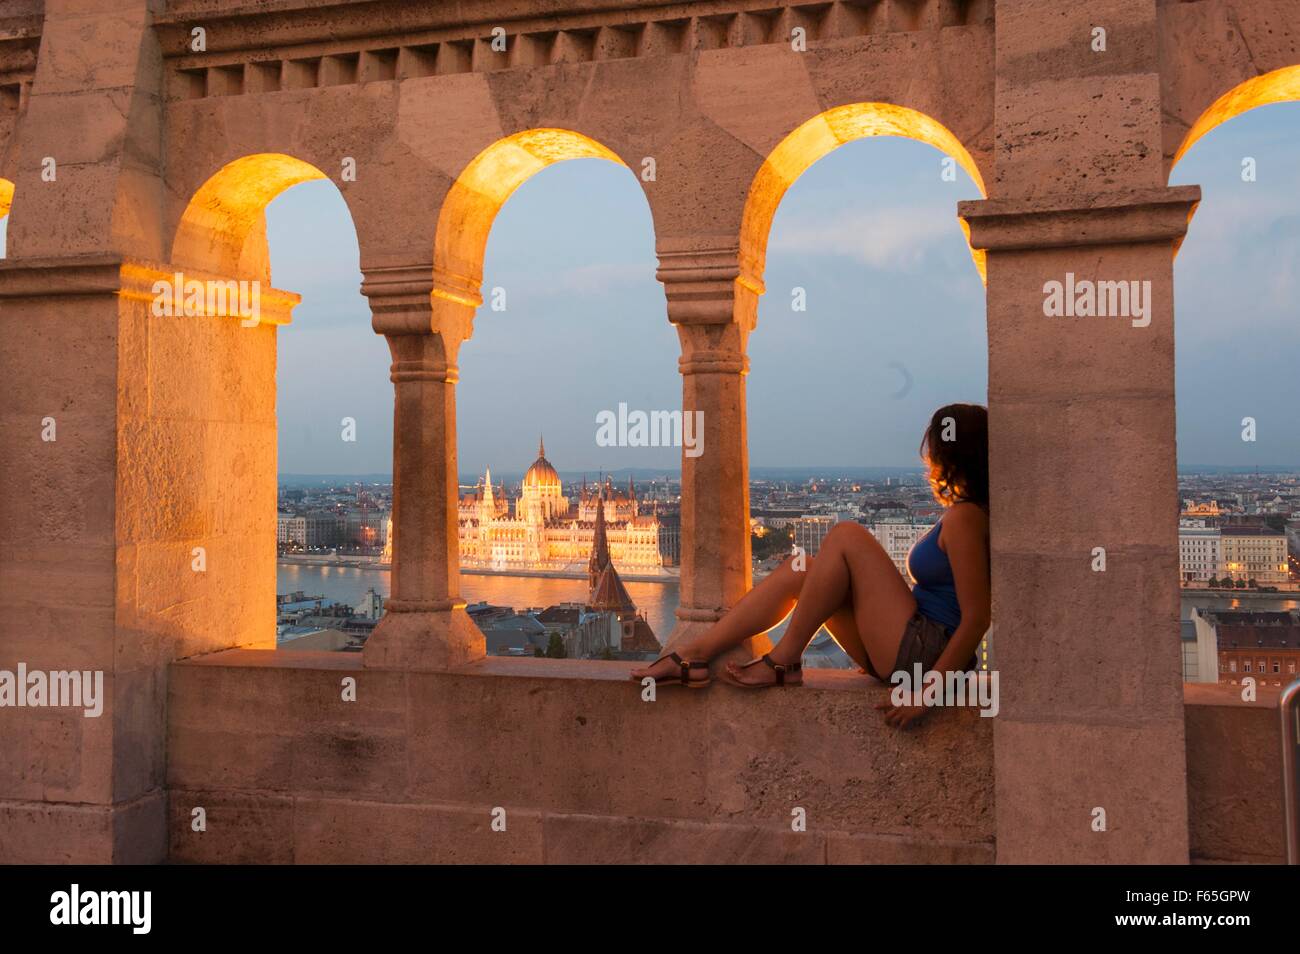 View from the Fisherman's Bastion of the illuminated parliament building in Budapest, Hungary Stock Photo